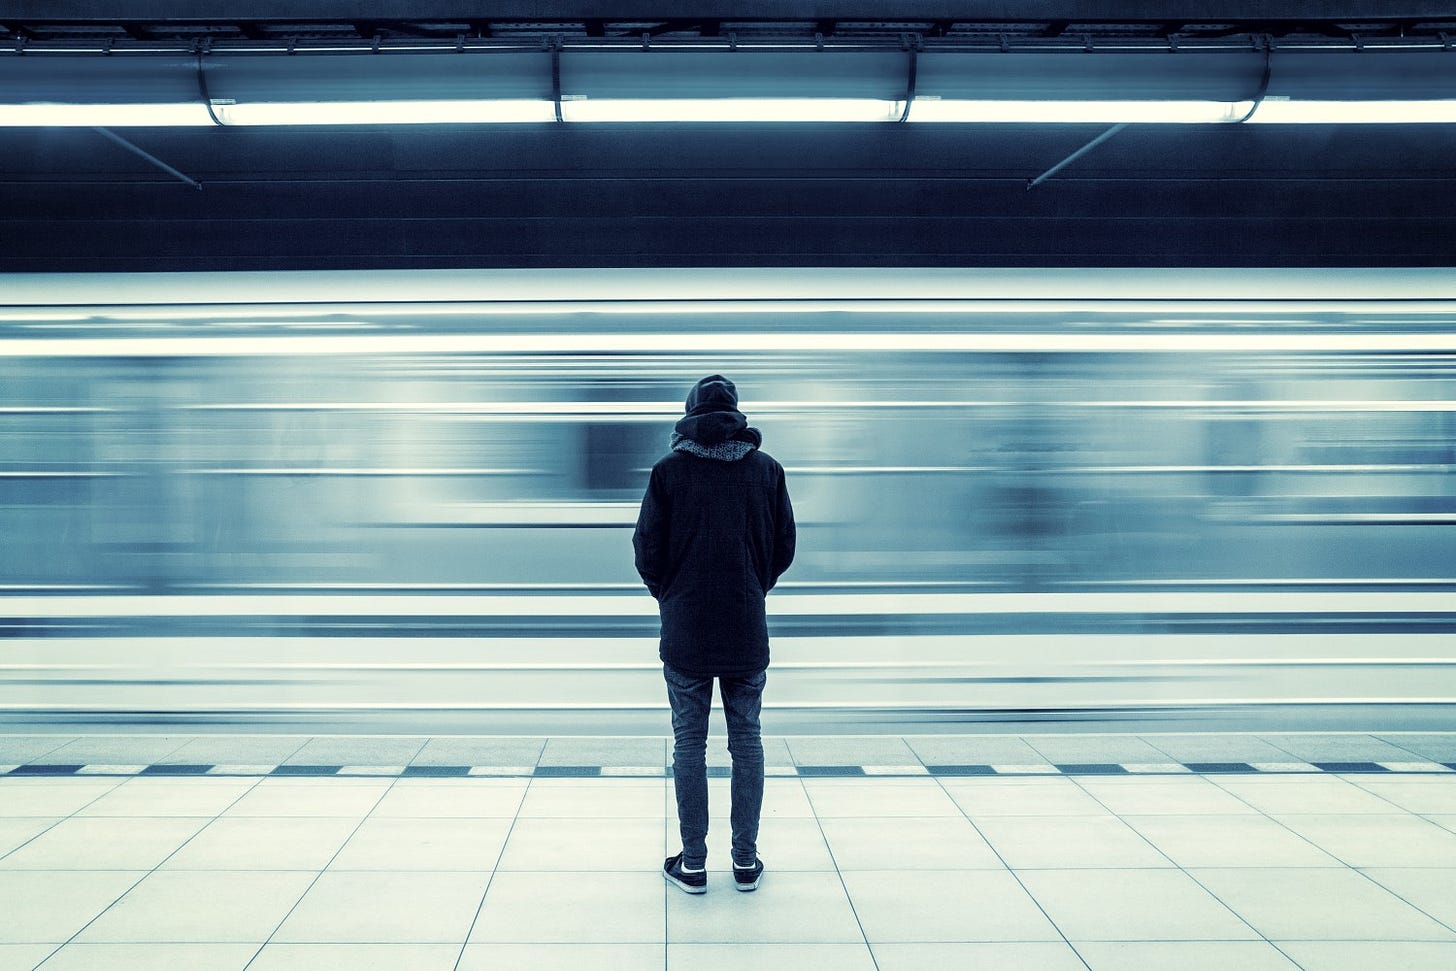 A person stands alone on a platform as a subway train whizzes by in a blur.